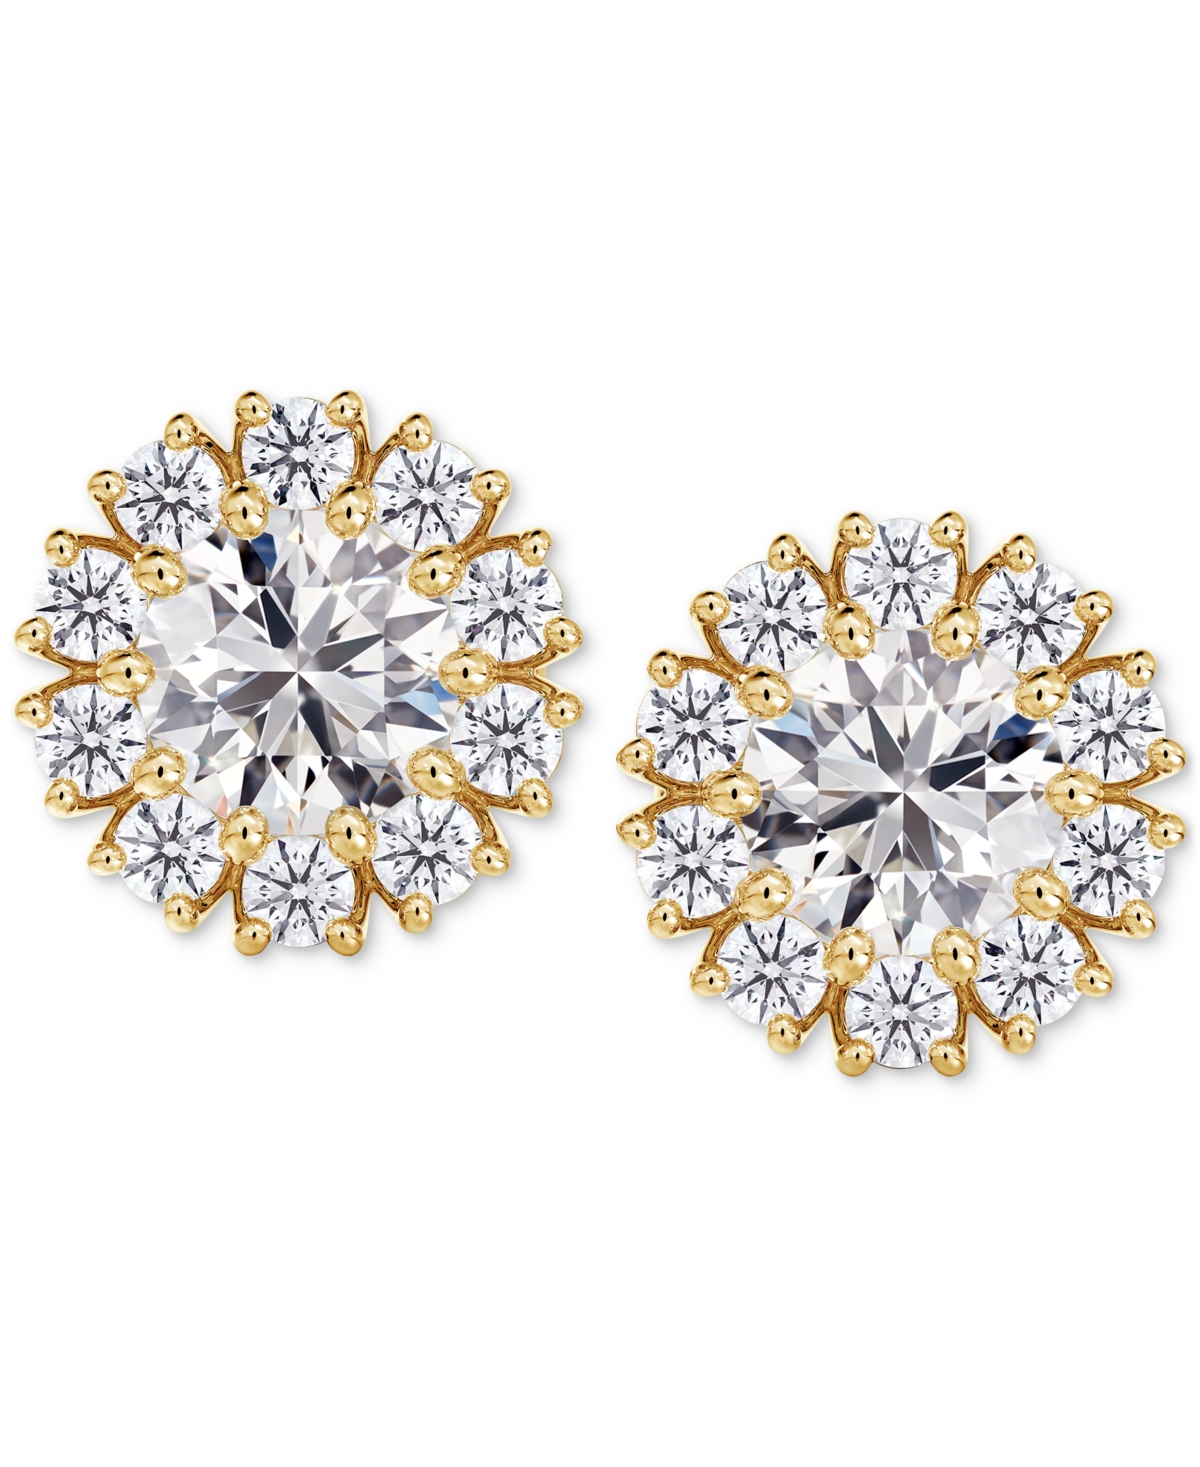 De Beers Forevermark Portfolio by De Beers Forevermark Diamond Halo Stud Earrings (1/2 ct. t.w.) in 14k White or Yellow Gold